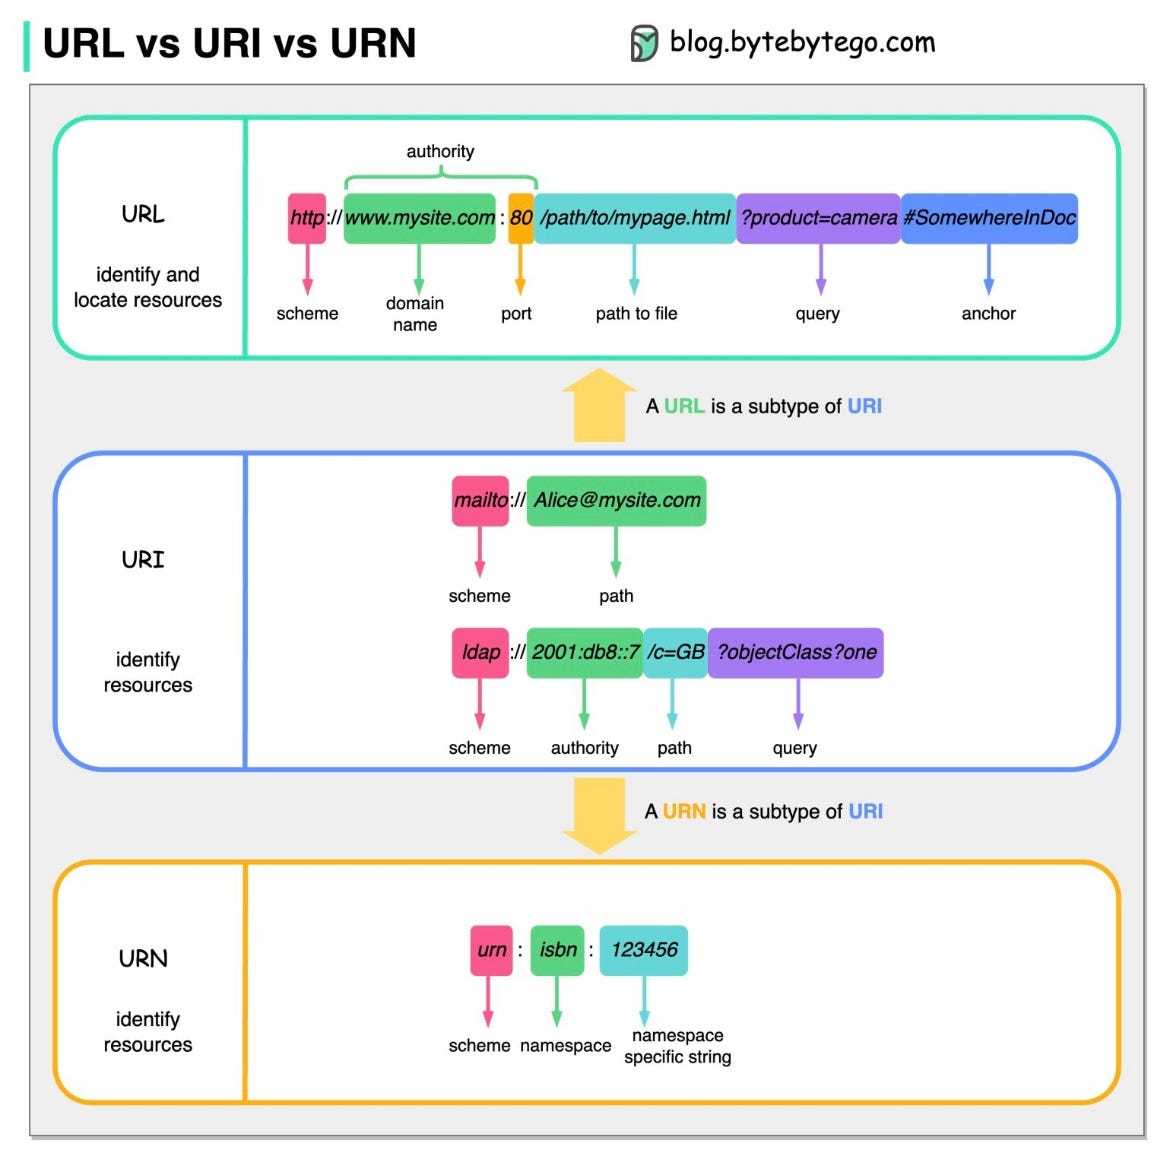 How the Domain Name System Works - URI- URN - URL - URC